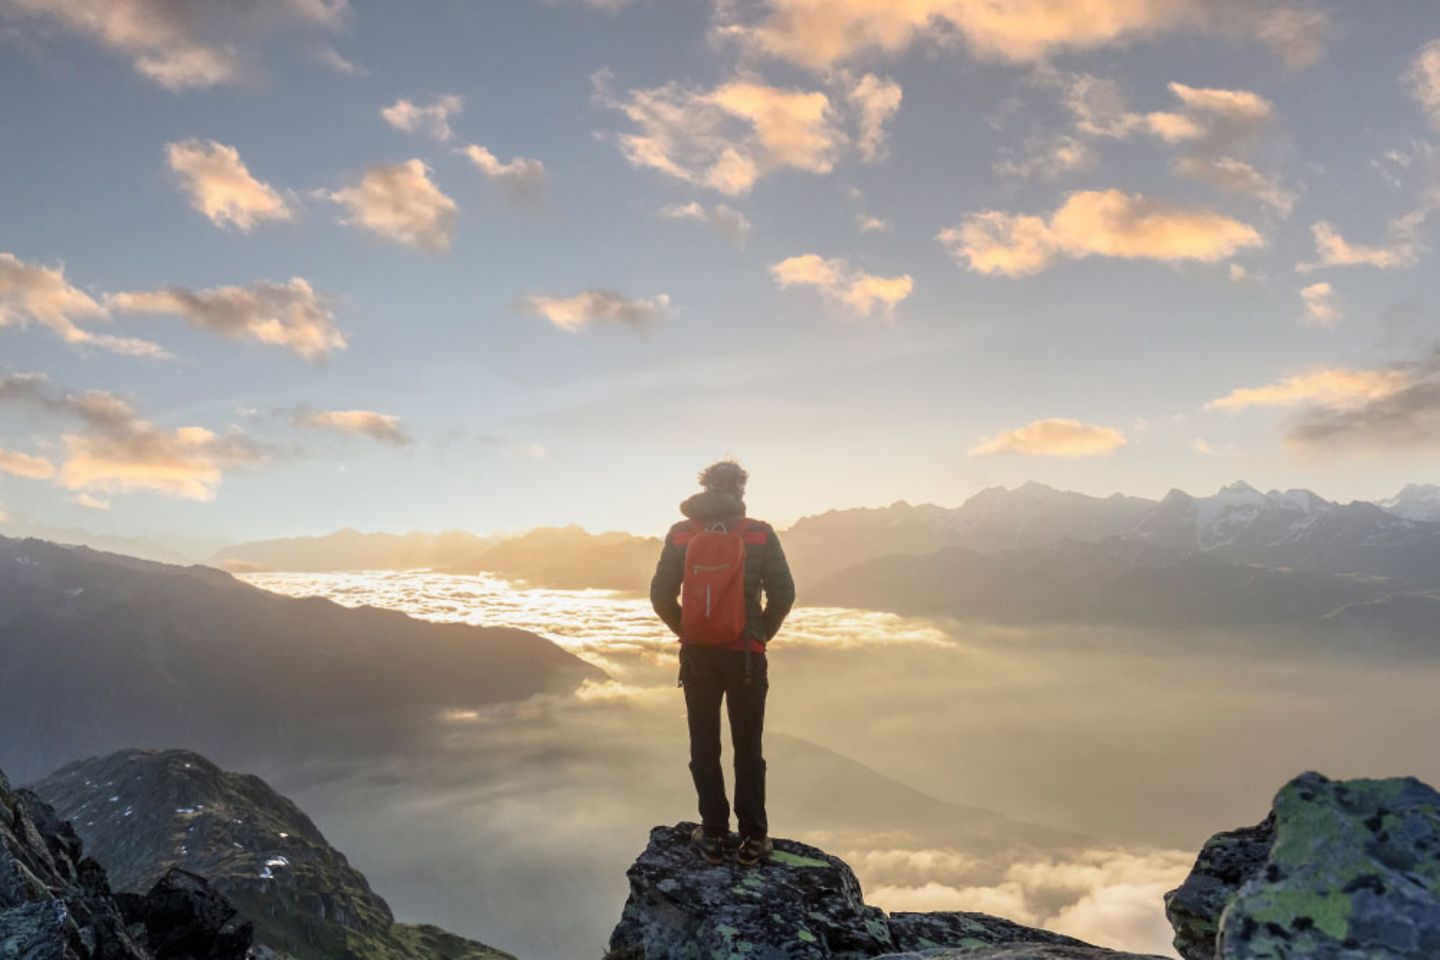 A man with hiking backpack stands on a mountain and looks at the view